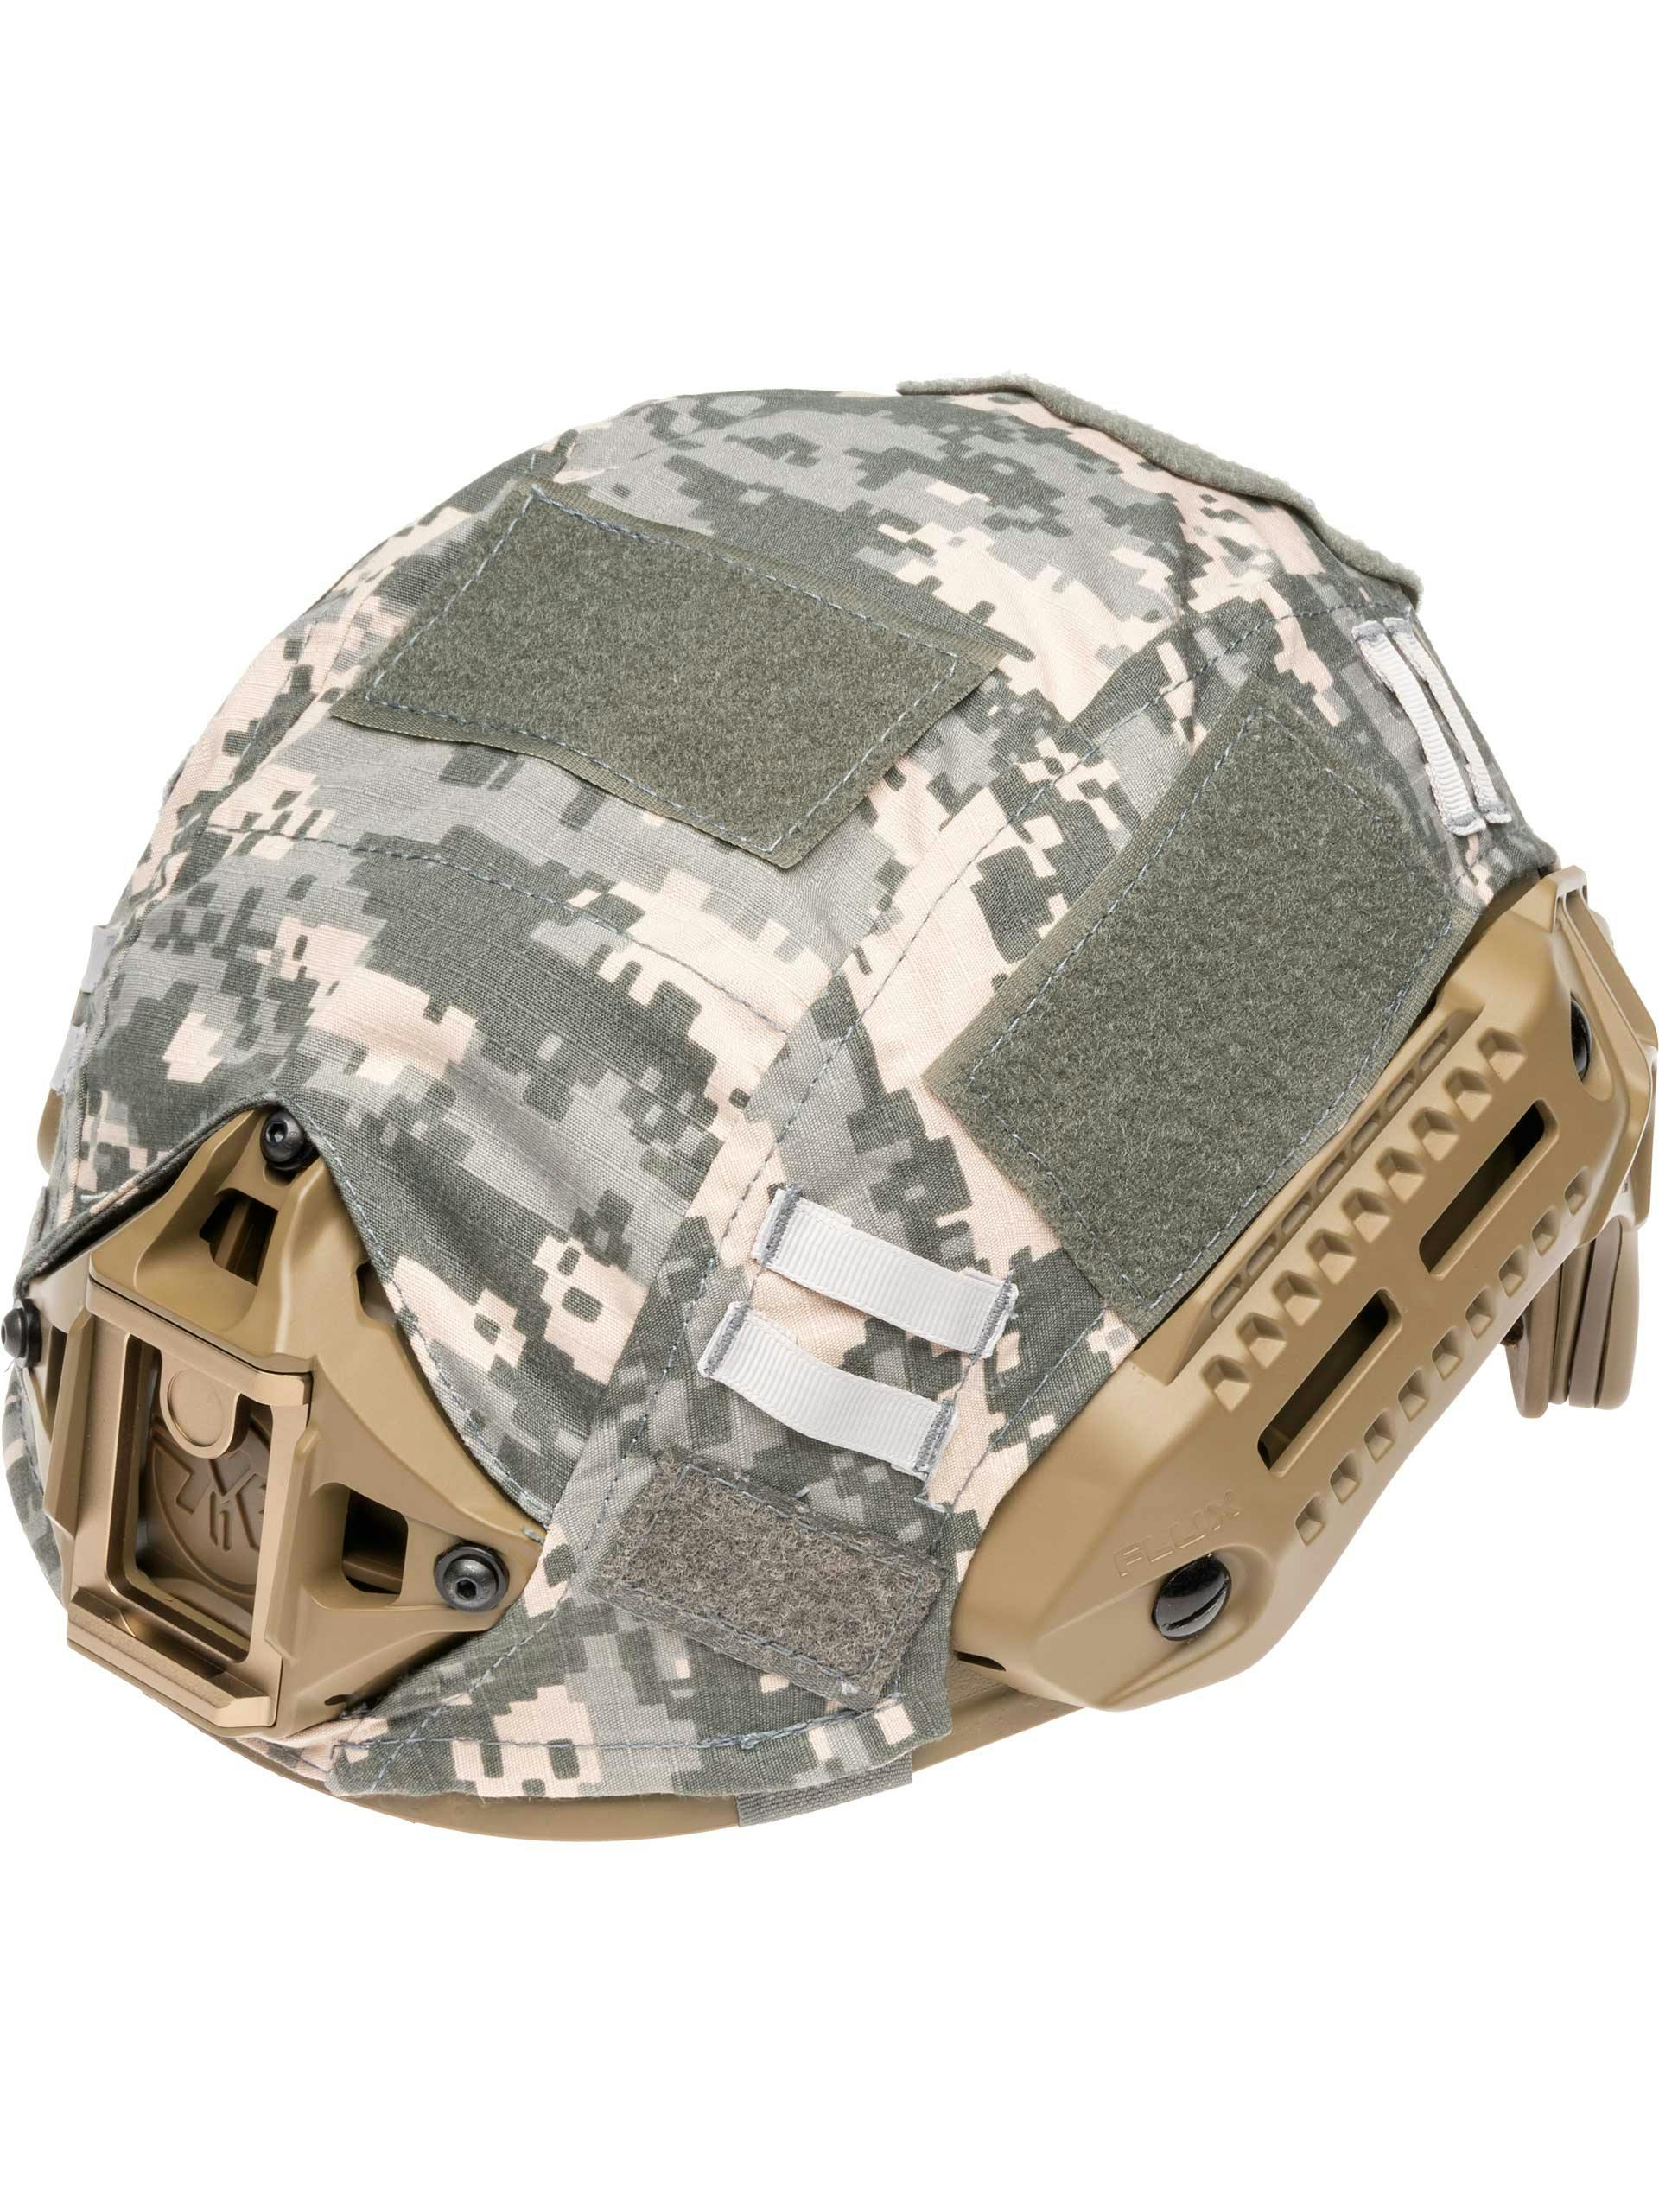 EMERSONGEAR Tactical Helmet Cover Camouflage Combat Helmet Accessories for Airsoft Paintball Gear Fast Helmet Cover BJ/PJ/MH 